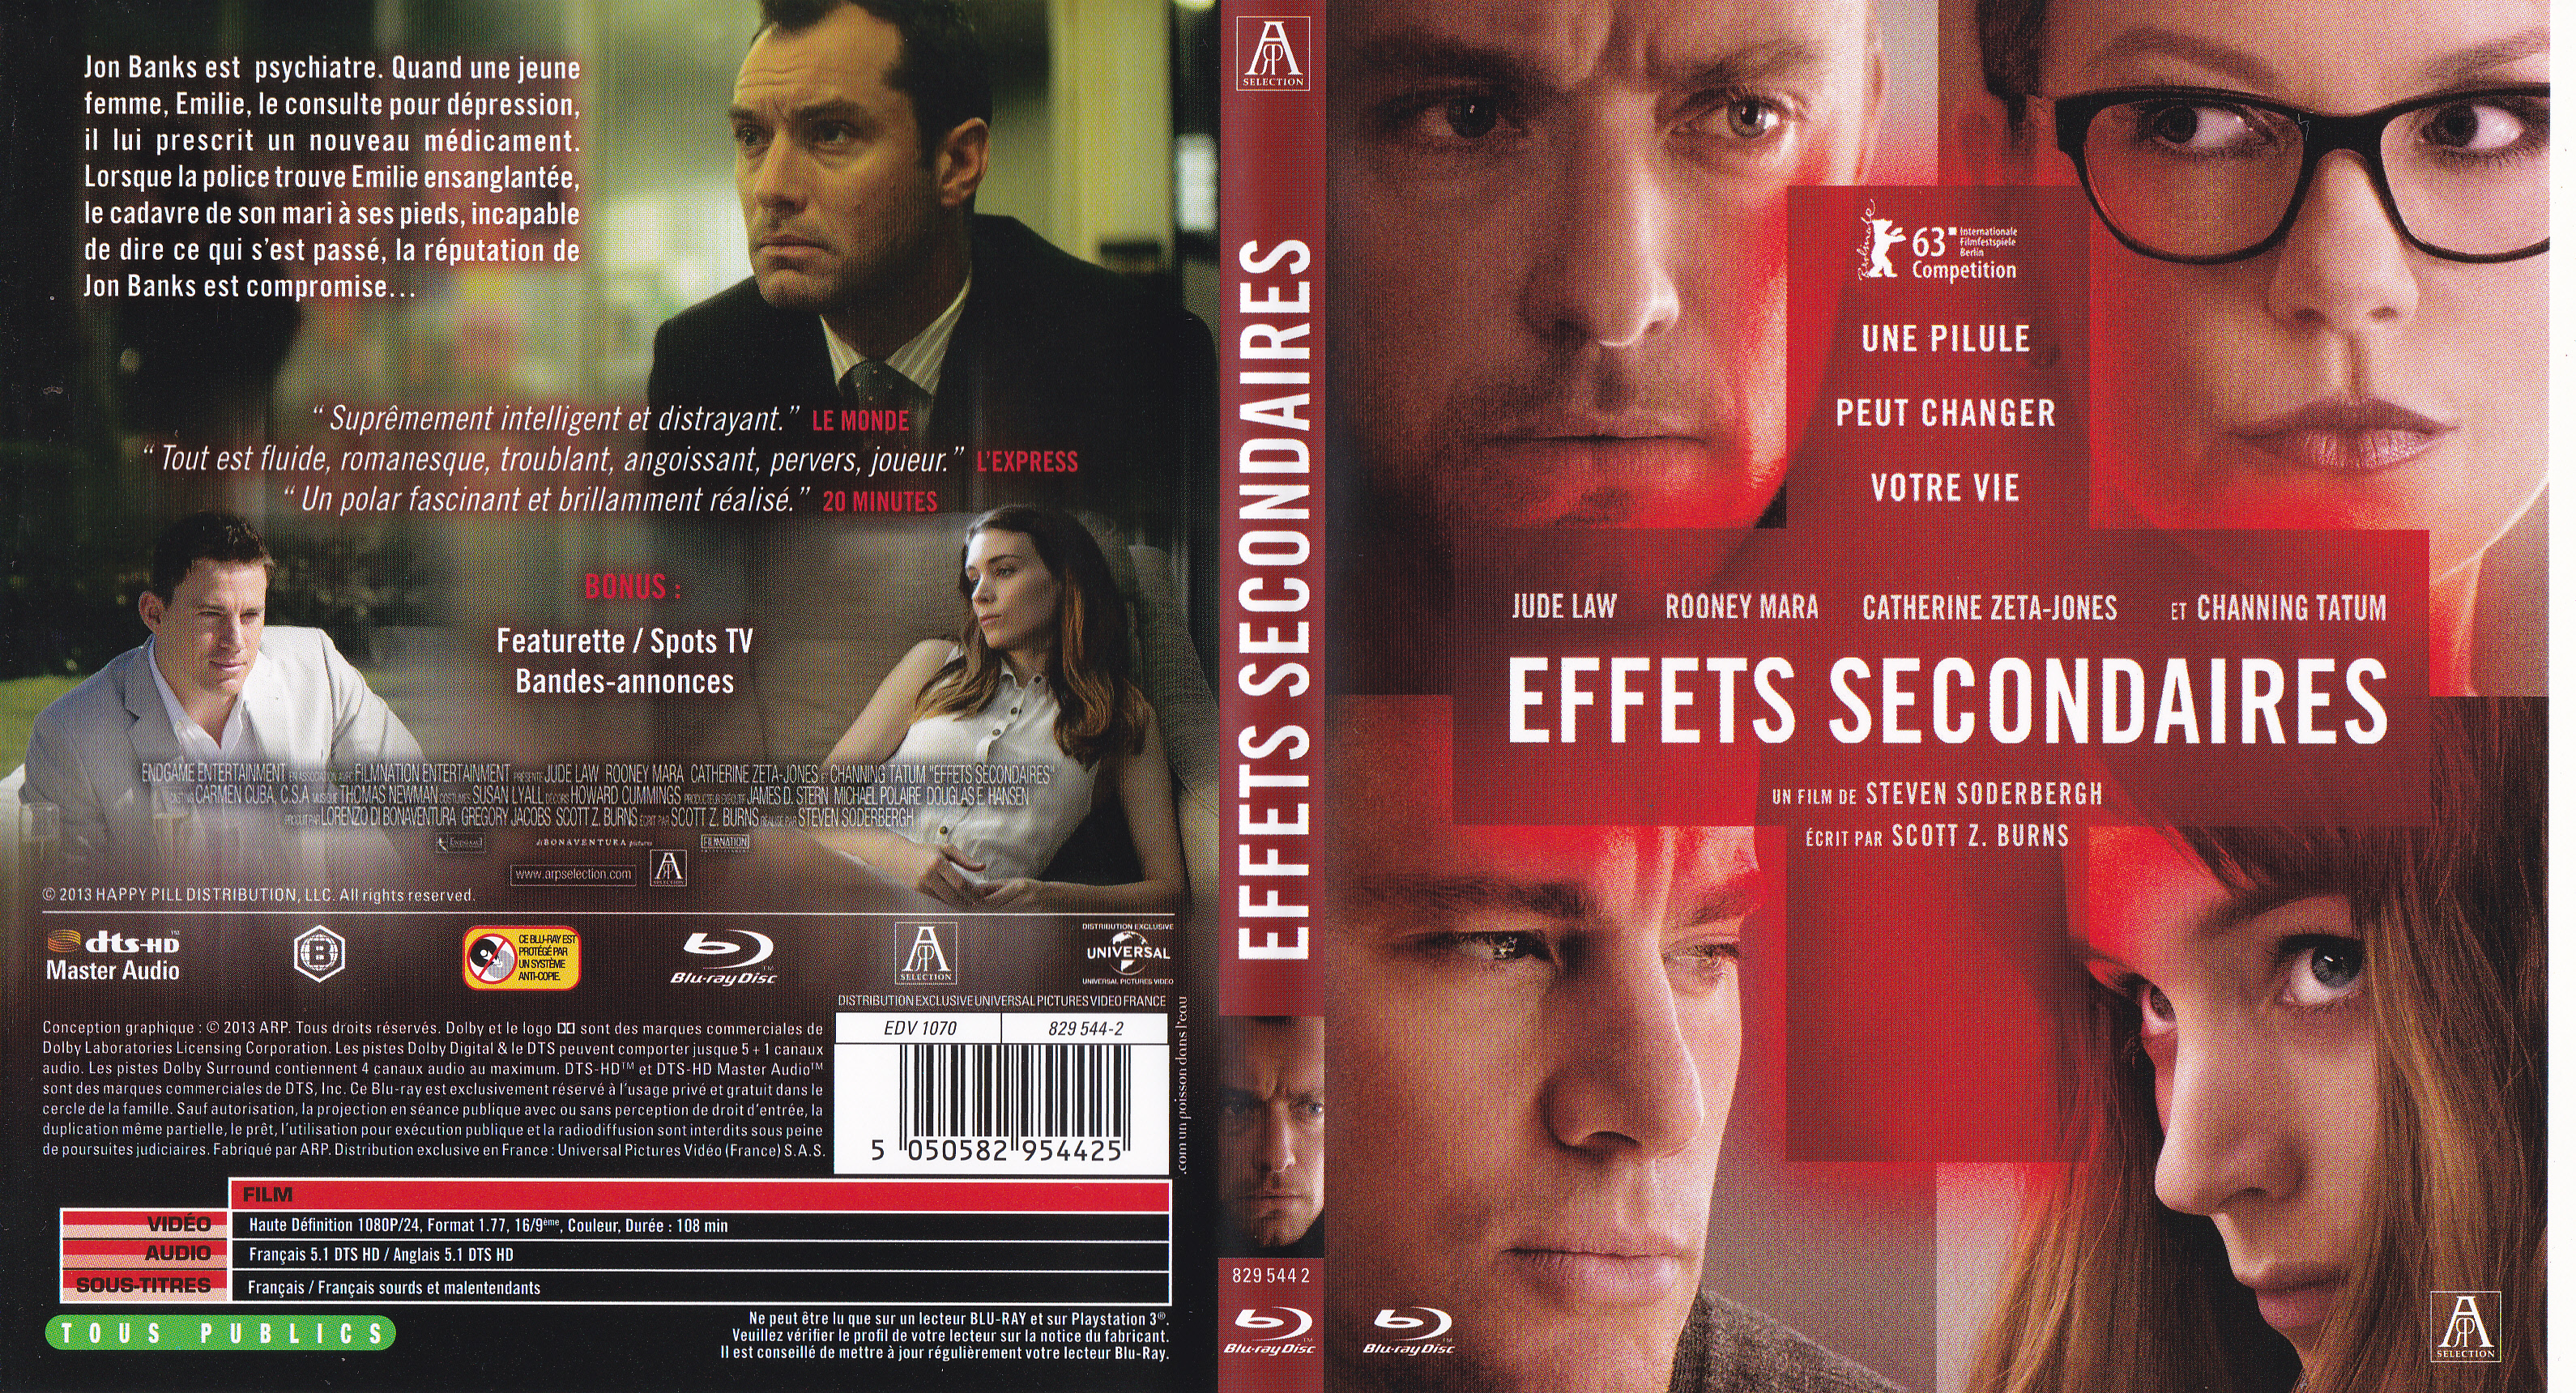 Jaquette DVD Effets secondaires (BLU-RAY)